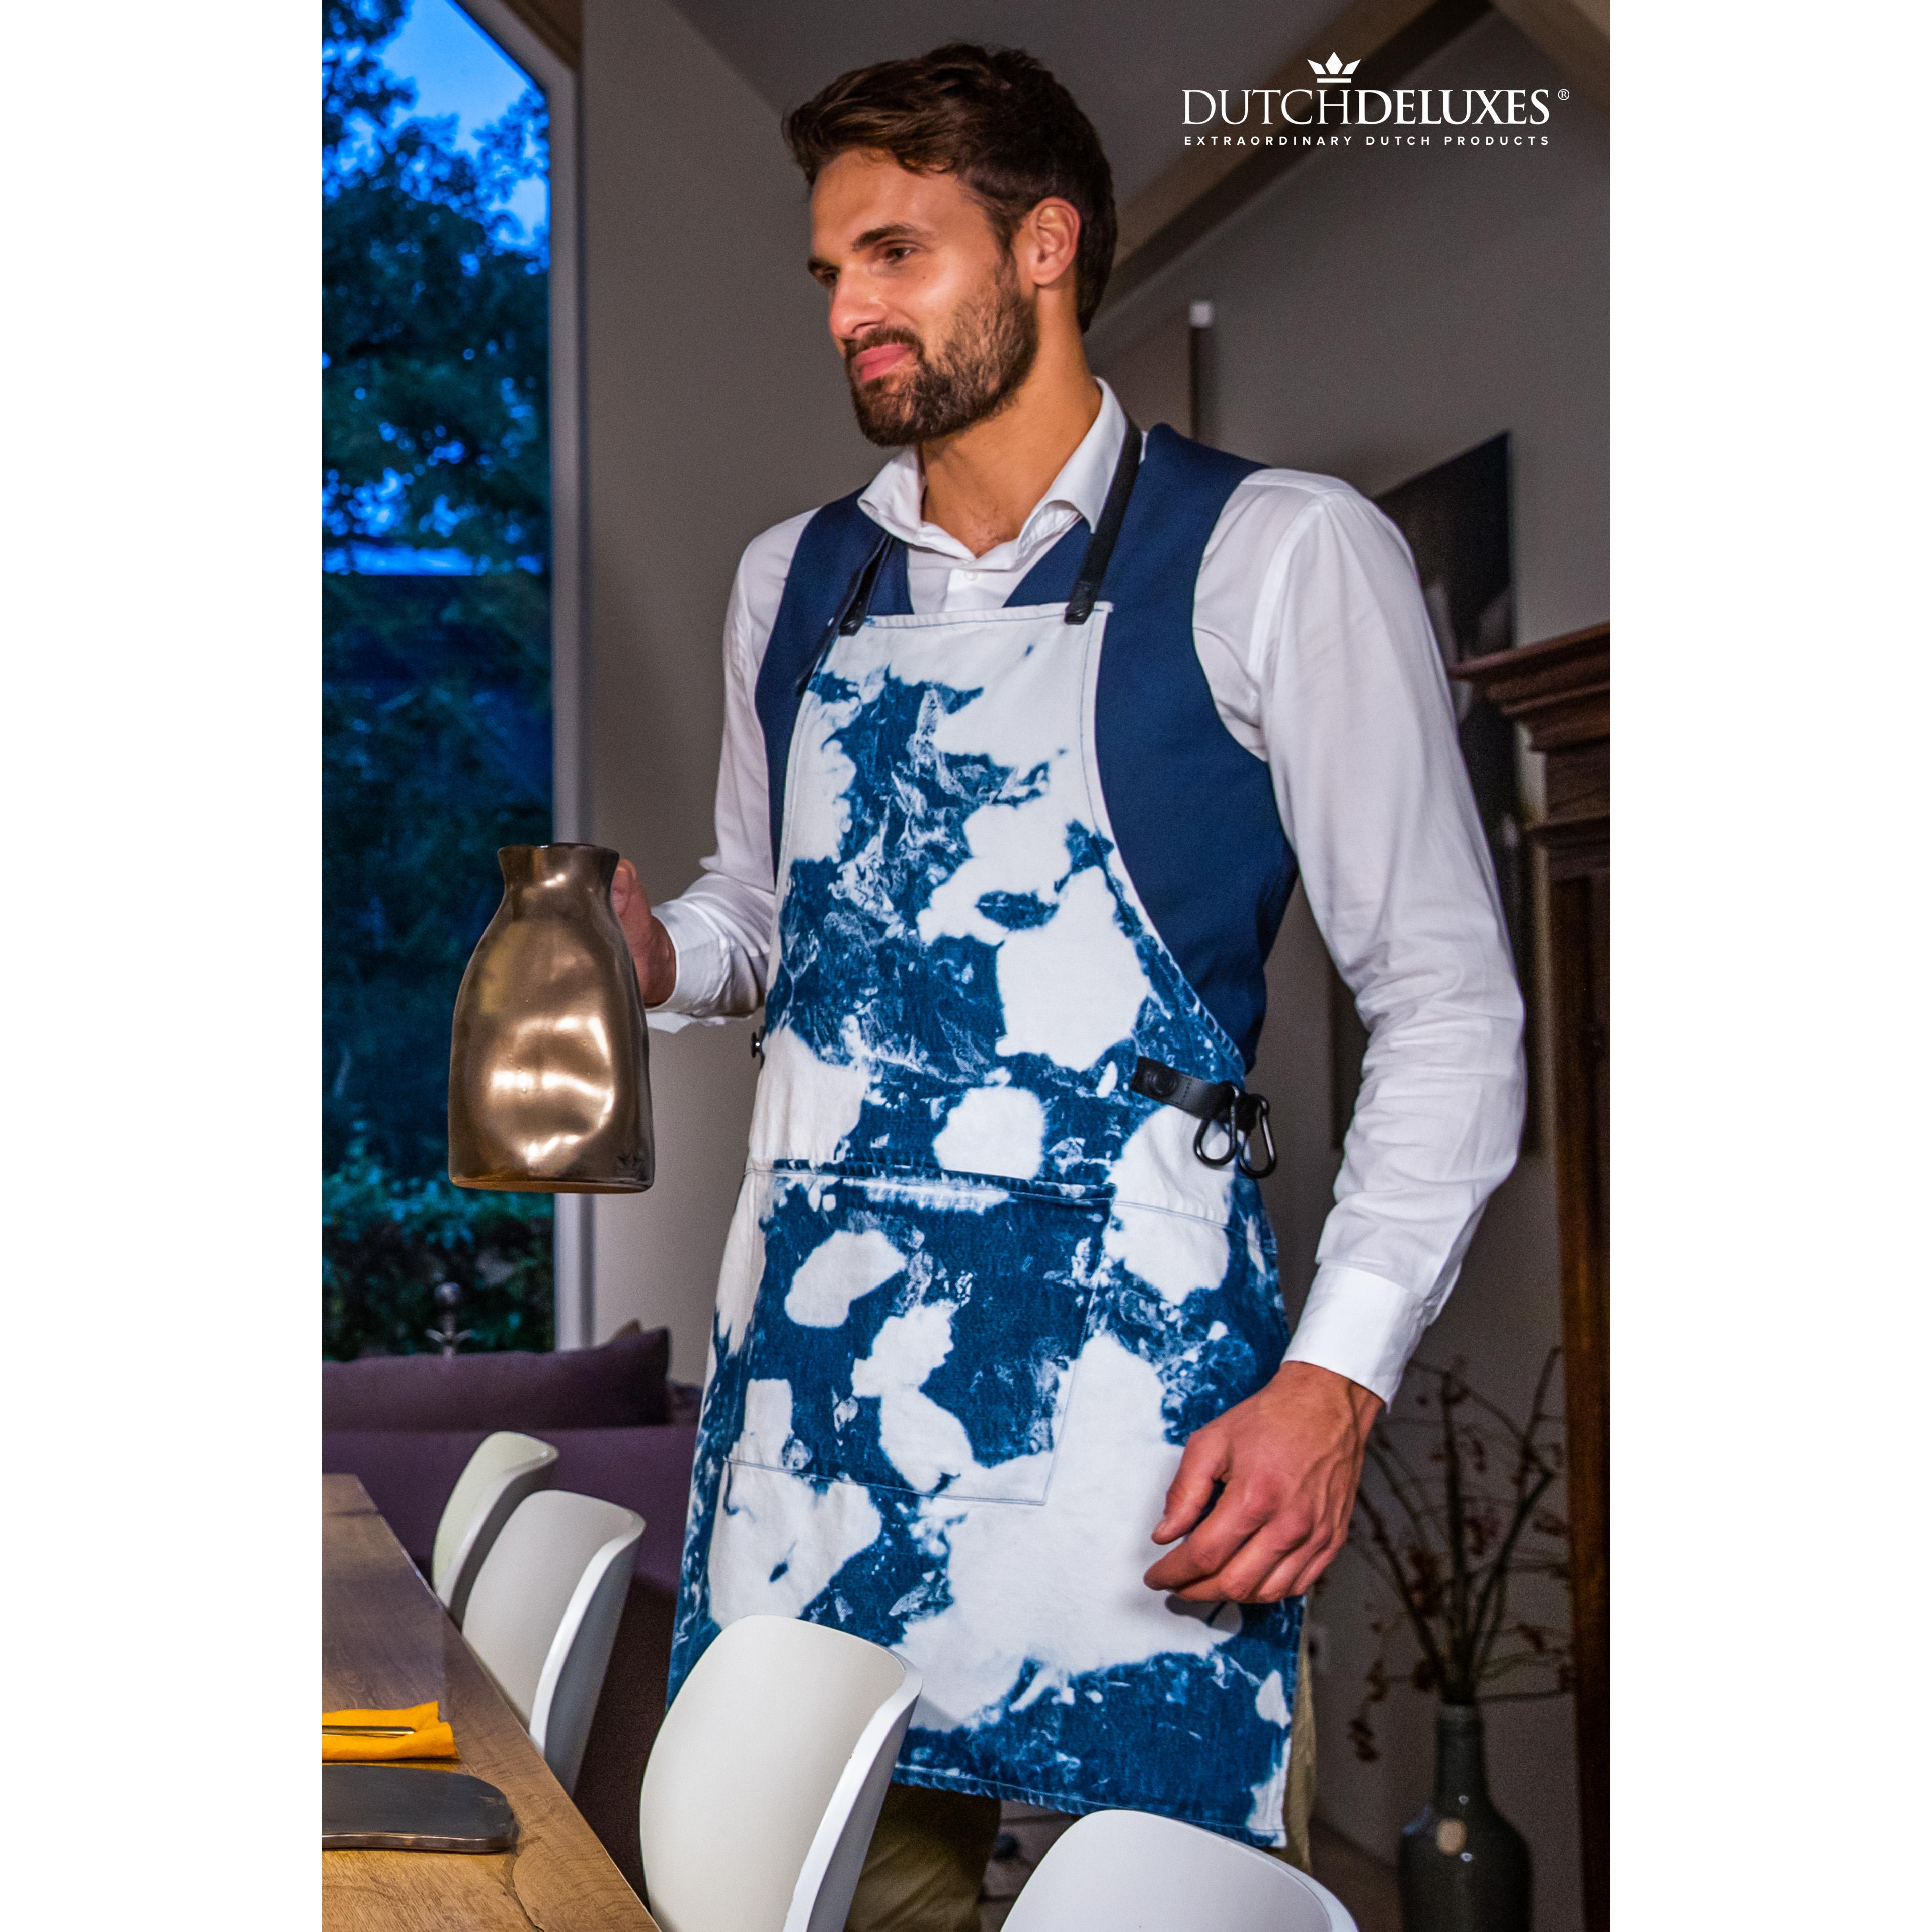 Dutchdeluxes Apron In Bbq Style, Blue Stained